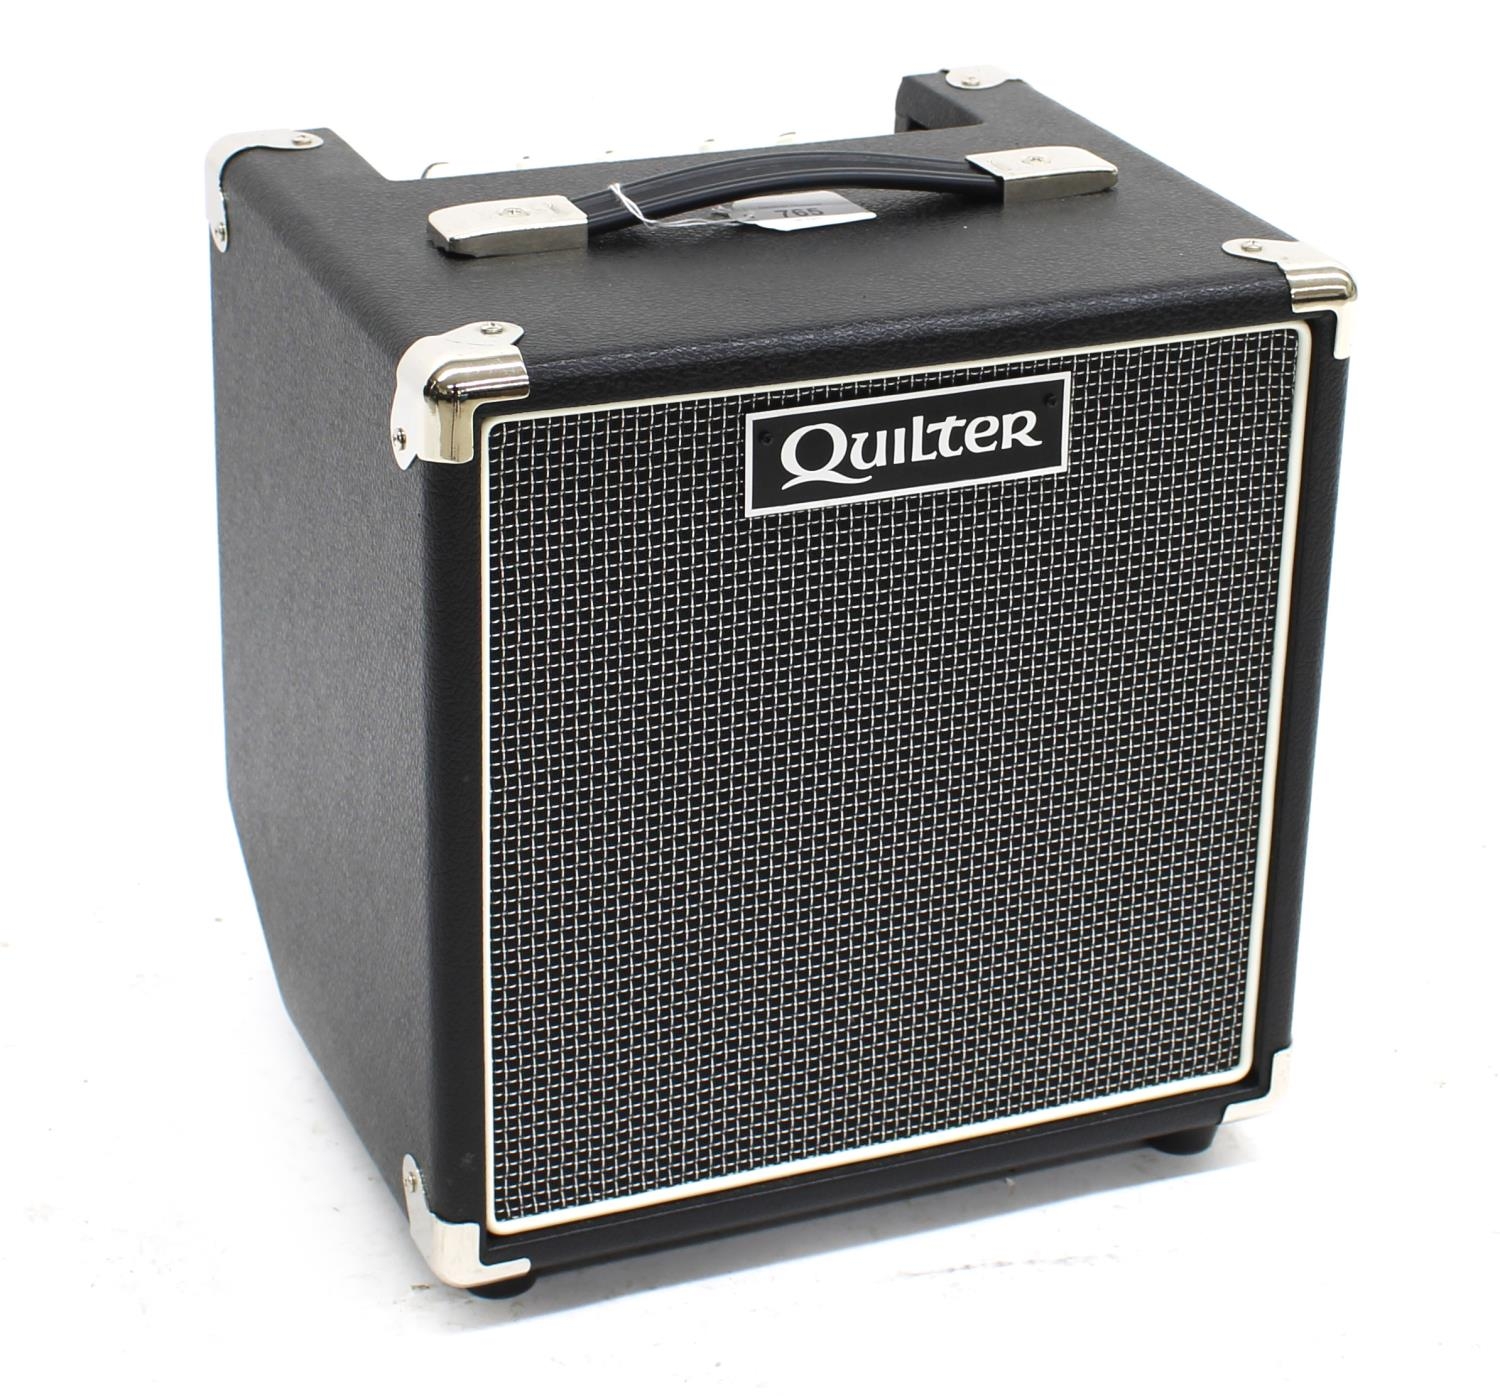 Quilter 101 Mini Head guitar amplifier, fitted into a single speaker cabinet